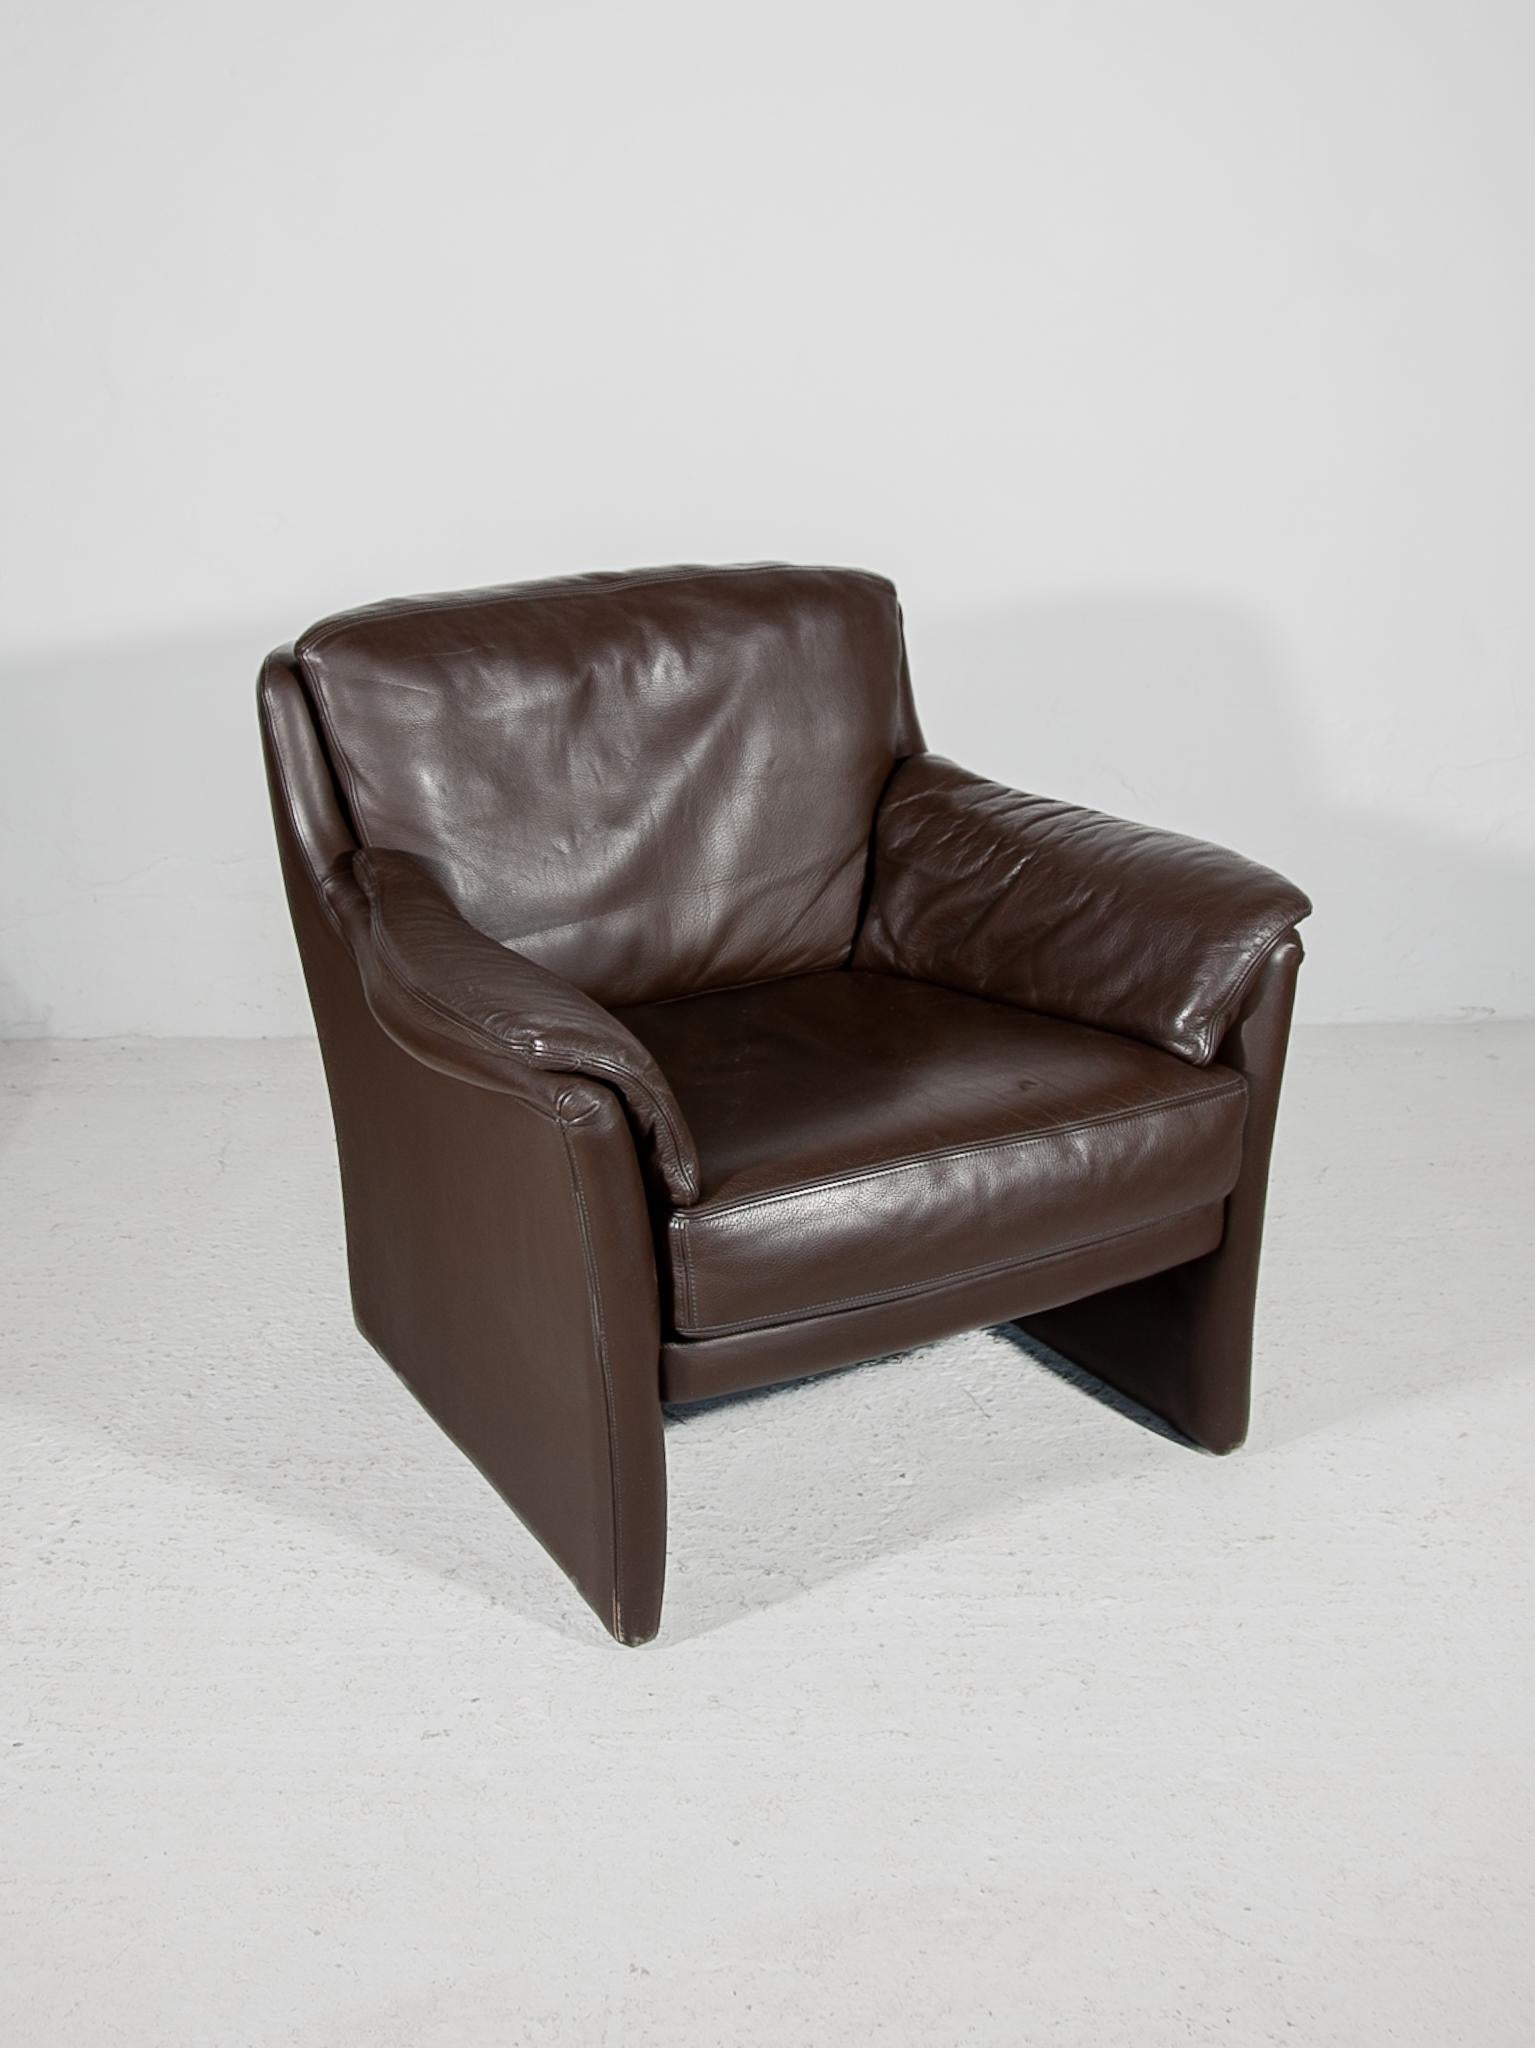 Vintage Durlet lounge chair, Belgium 1970s. Classic lines, premium buffalo leather the seating comfort is excellent!
Also a two seat sofa and three seater sofa see our other marketplace listenings.
Complete living room set 1970s signed by Durlet.